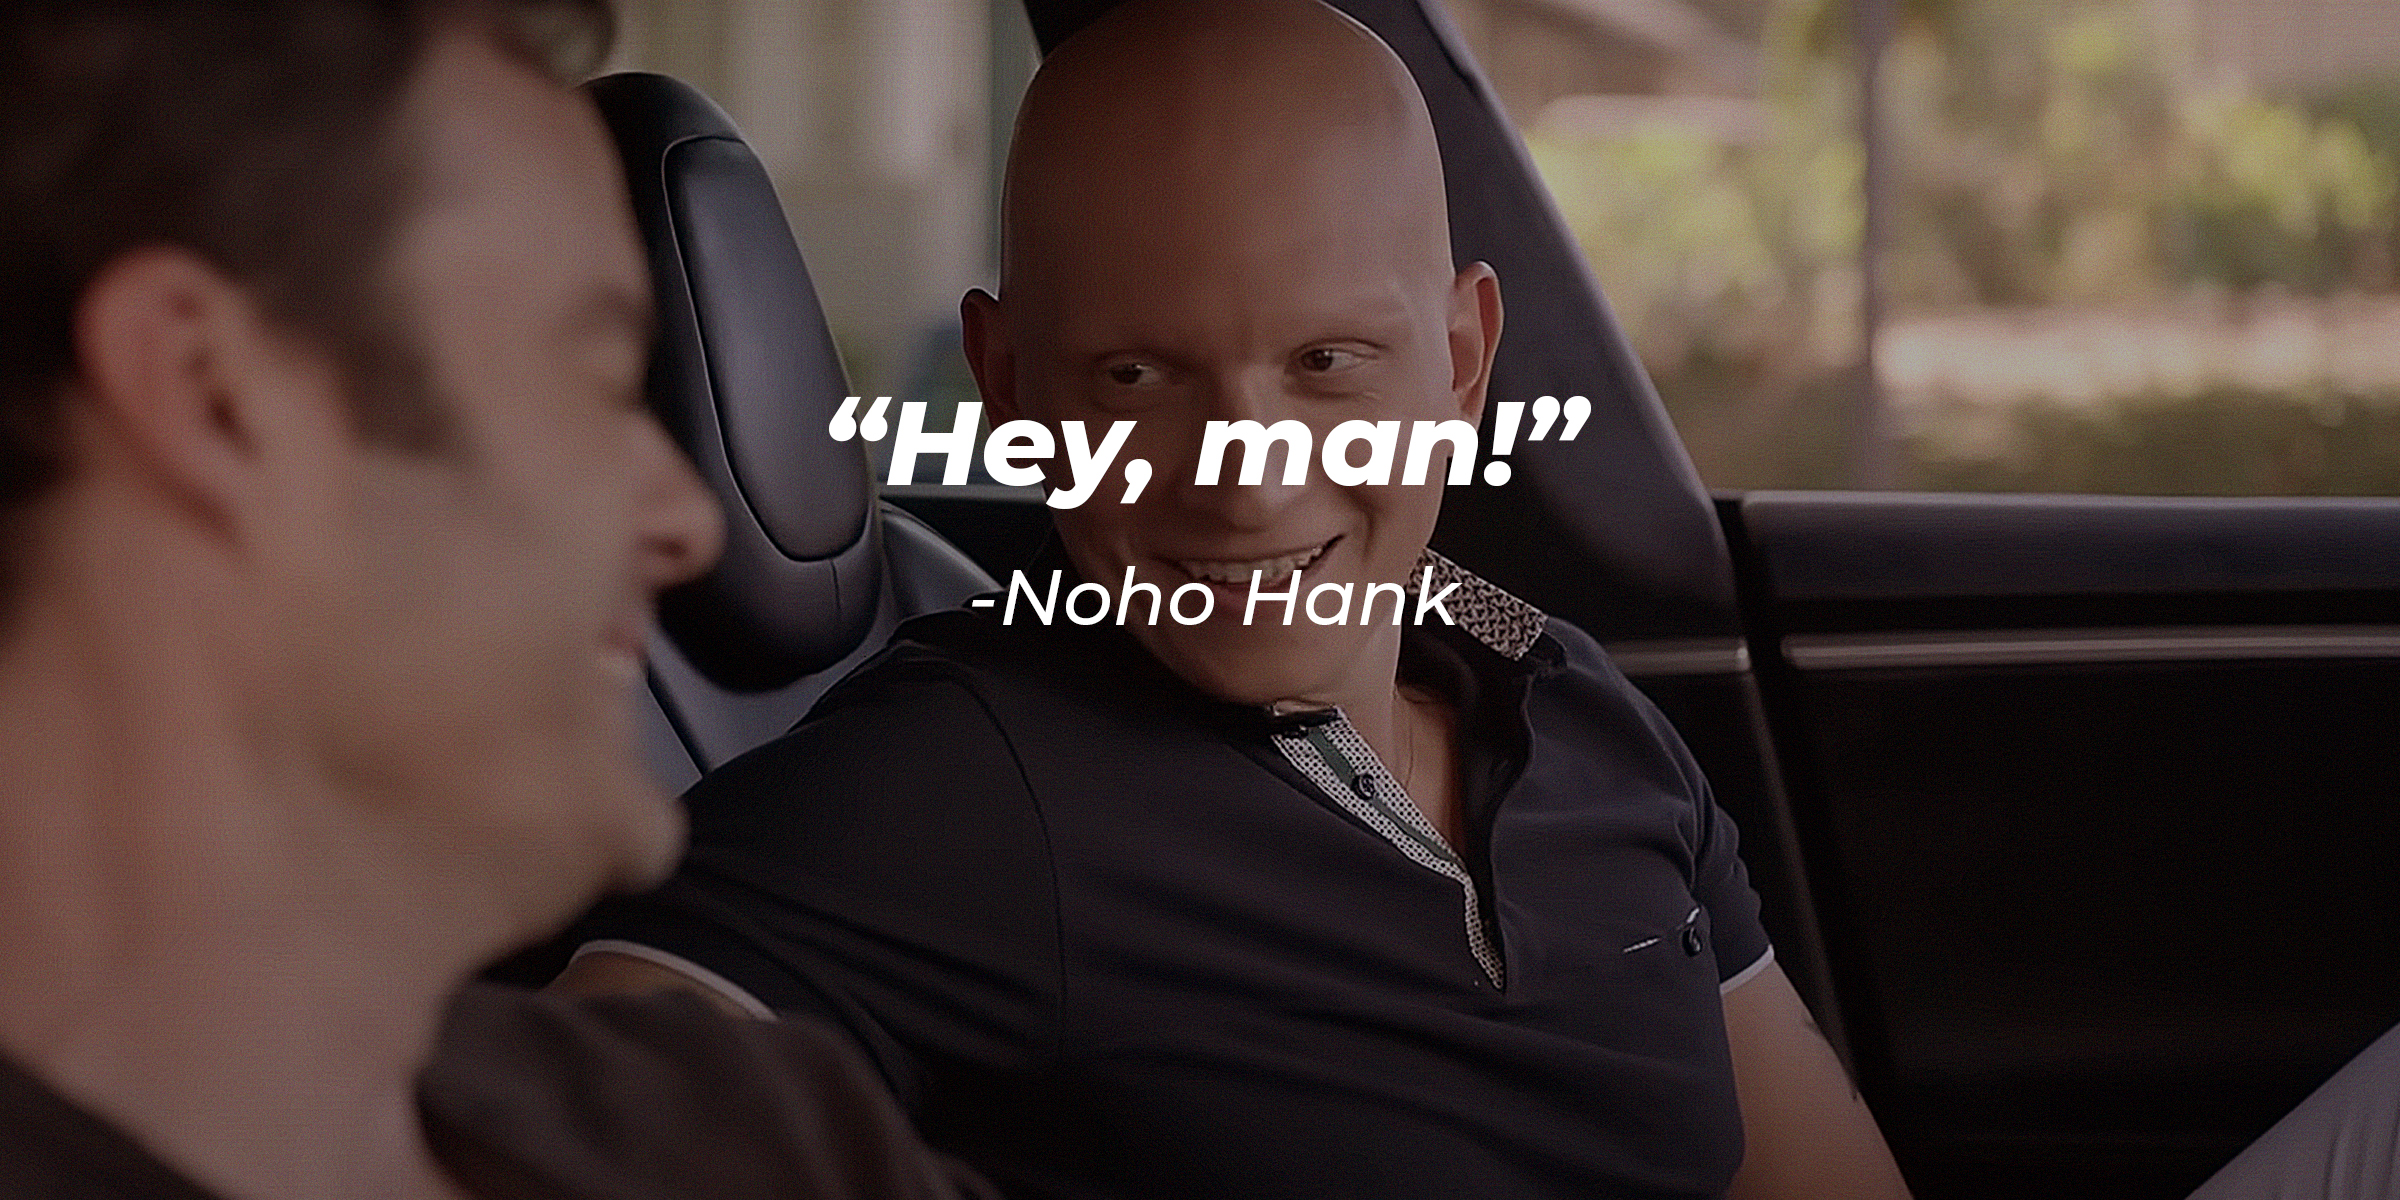 NoHo Hank, with his quote: “Hey, man!” | Source: youtube.com/HBO